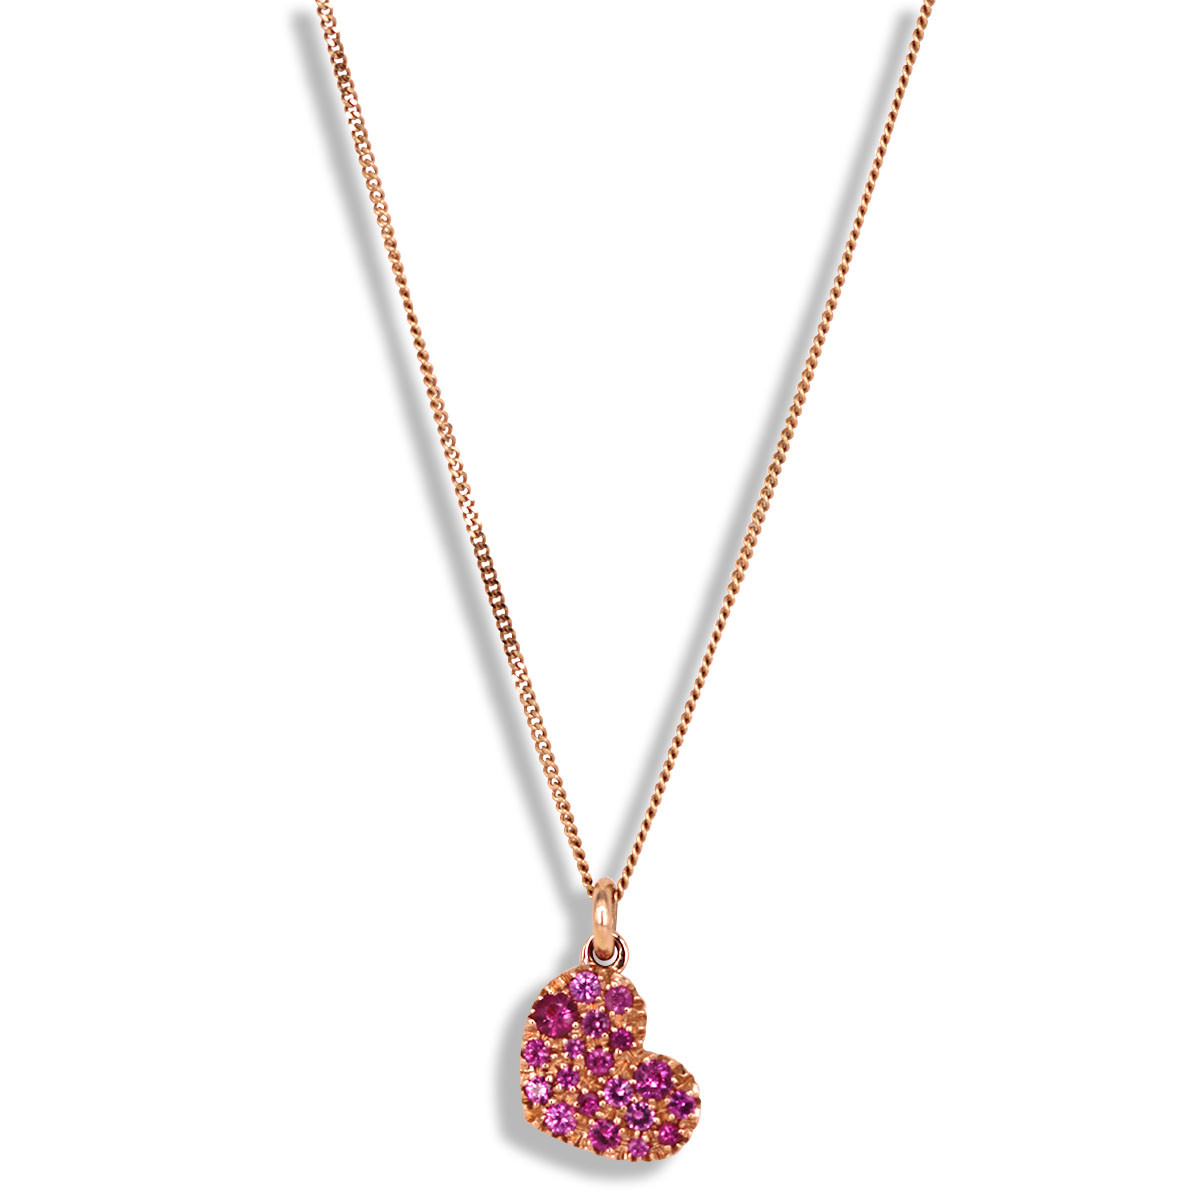 HEART OF SAPPHIRES PENDANT PINK